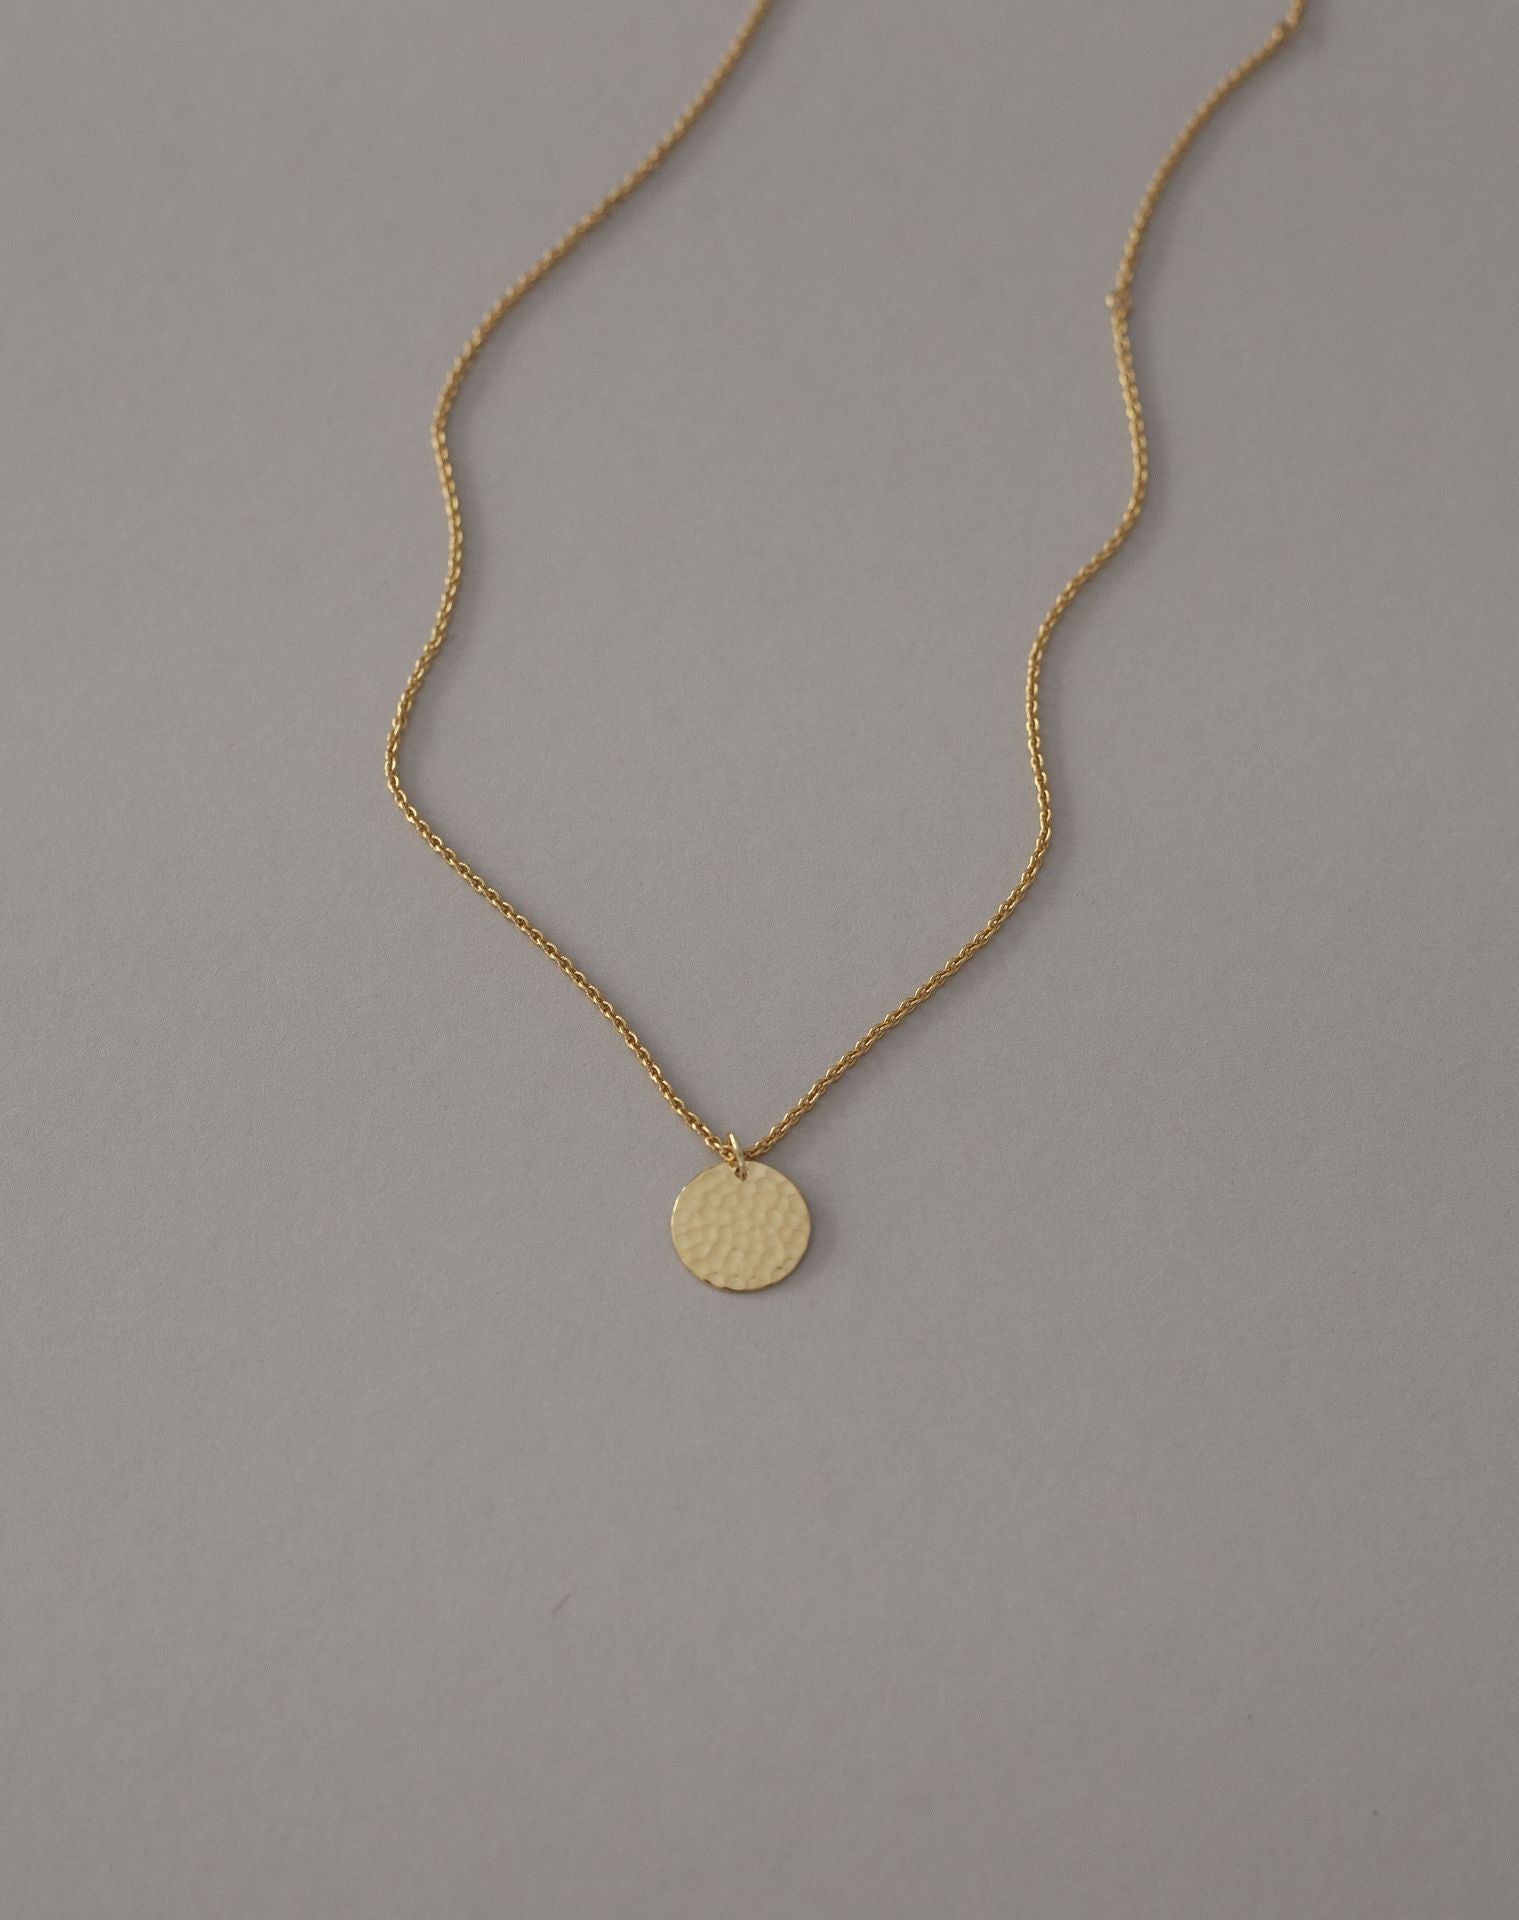 NECKLACE GOLD WITH HAMMERED DISK